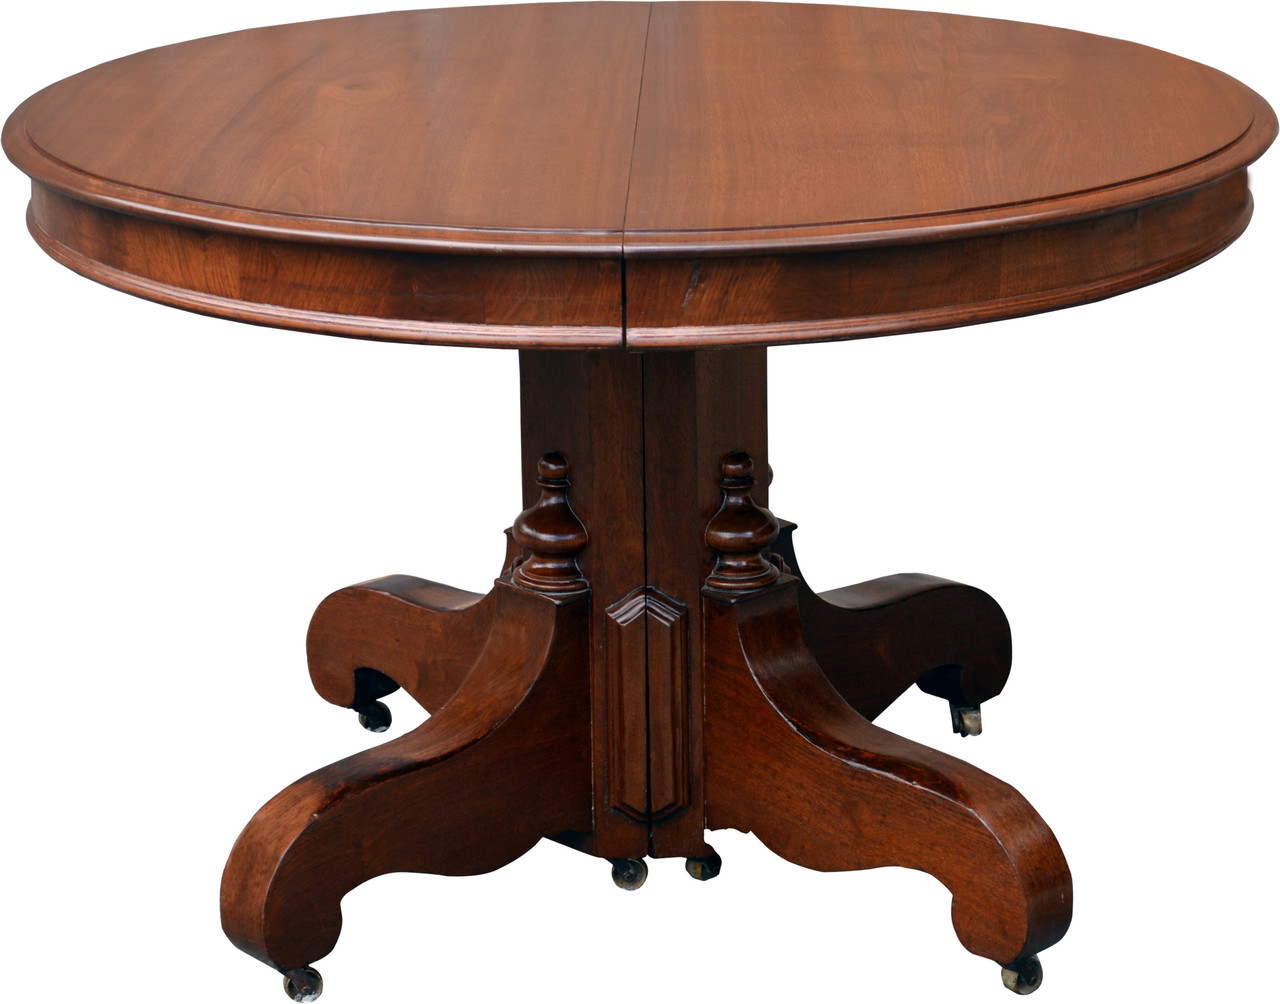 Sold Victorian Round Walnut Dining Table With Two Leaves Maine Antique Furniture